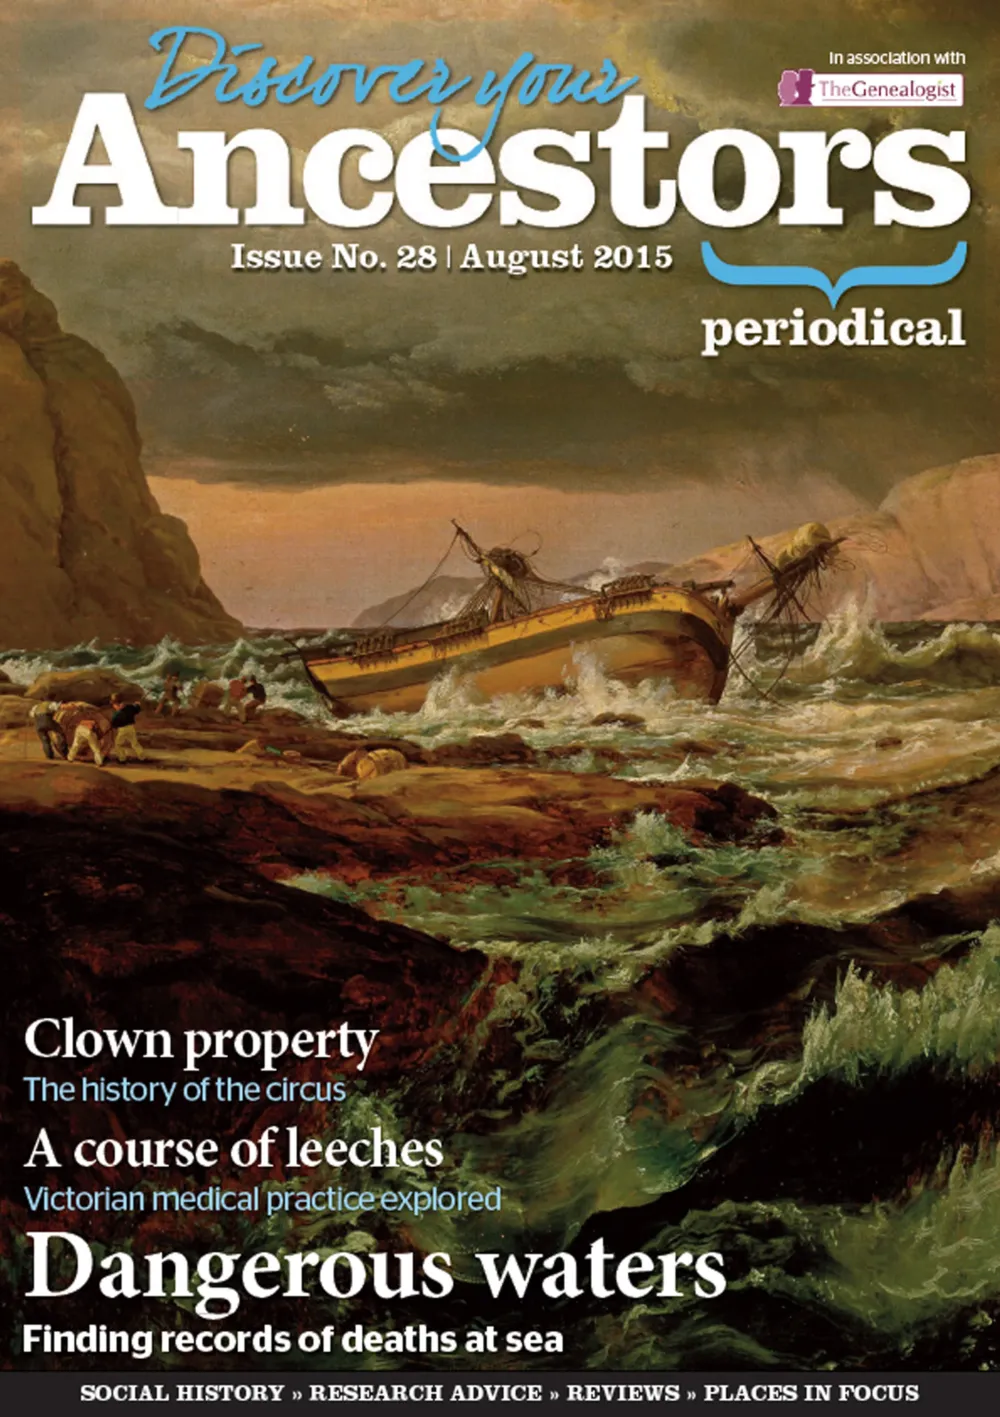 Discover Your Ancestors Periodical - August 2015